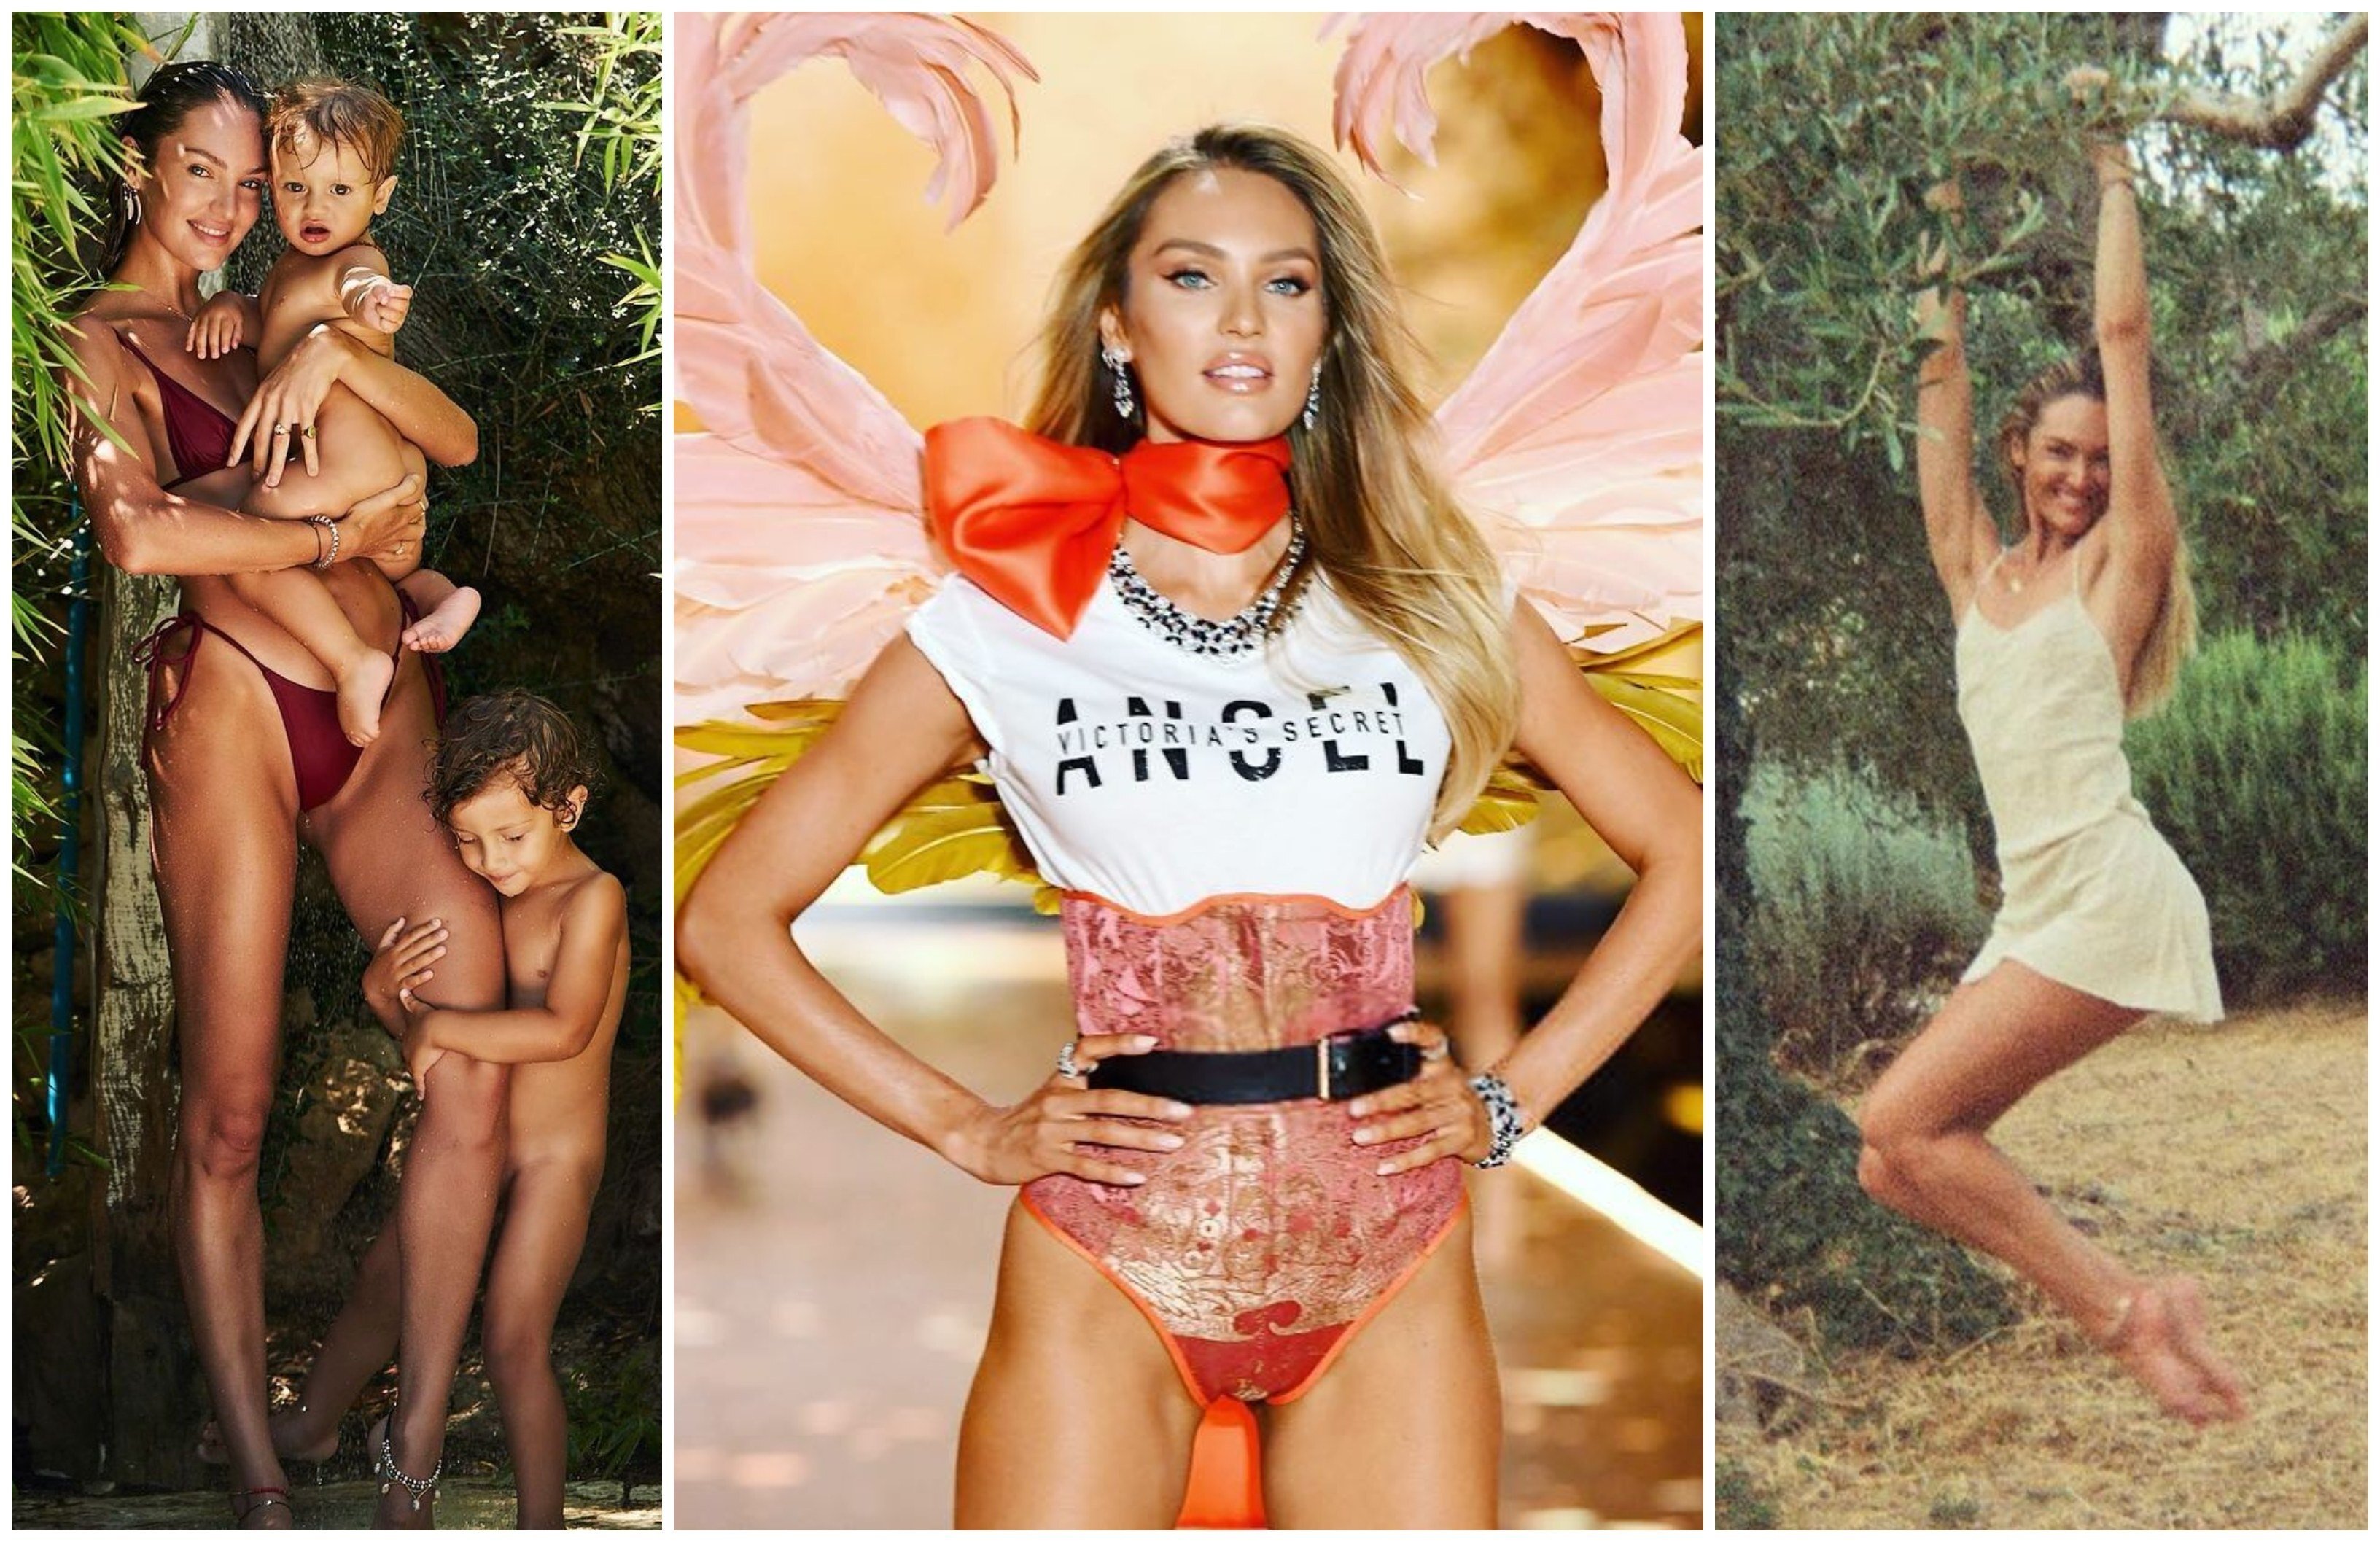 Supermodel, businesswoman and single mother of two... here’s everything you need to know about former Victoria’s Secret Angel, Candice Swanepoel. Photos: @candiceswanepoel/Instagram